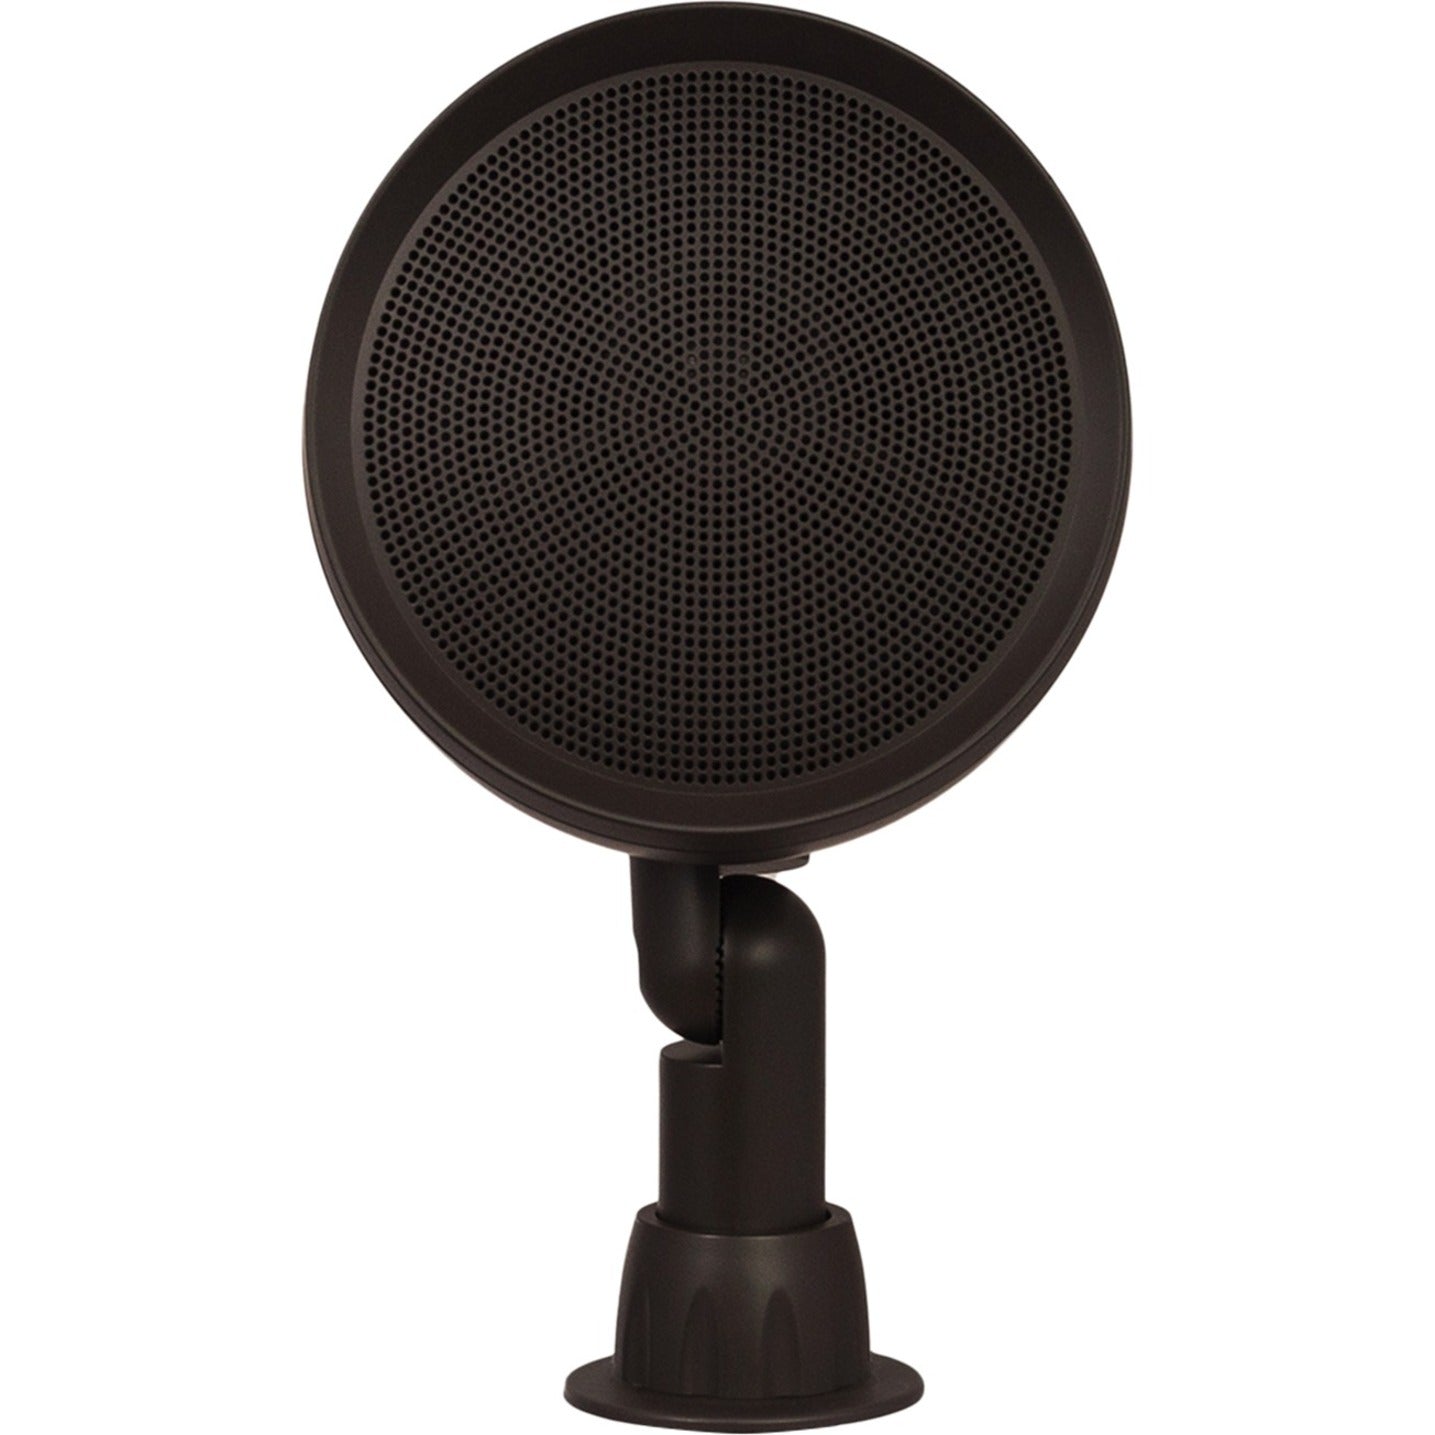 Proficient Audio PAS-AW-LS-6 Signature 6-in All-Weather Outdoor Landscape Speaker, Rugged Design, 120W RMS Output Power